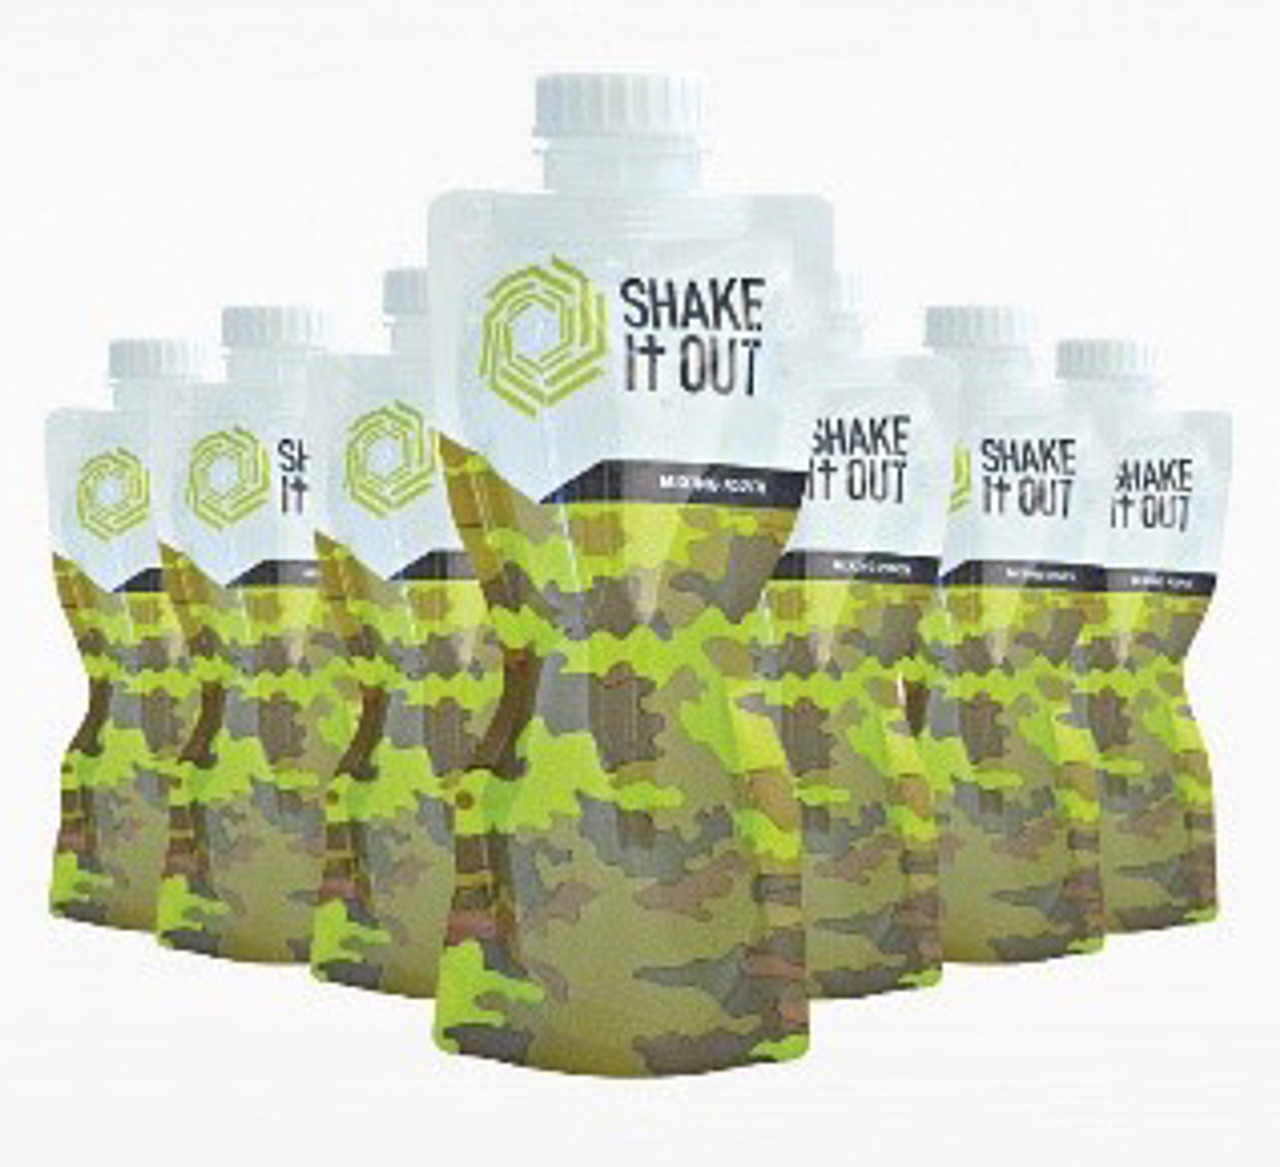 https://cdn11.bigcommerce.com/s-f5nluqx9ag/images/stencil/1280x1280/products/113/405/Shake-It-Out-Camo-7-Pack__80919.1594045561.jpg?c=2